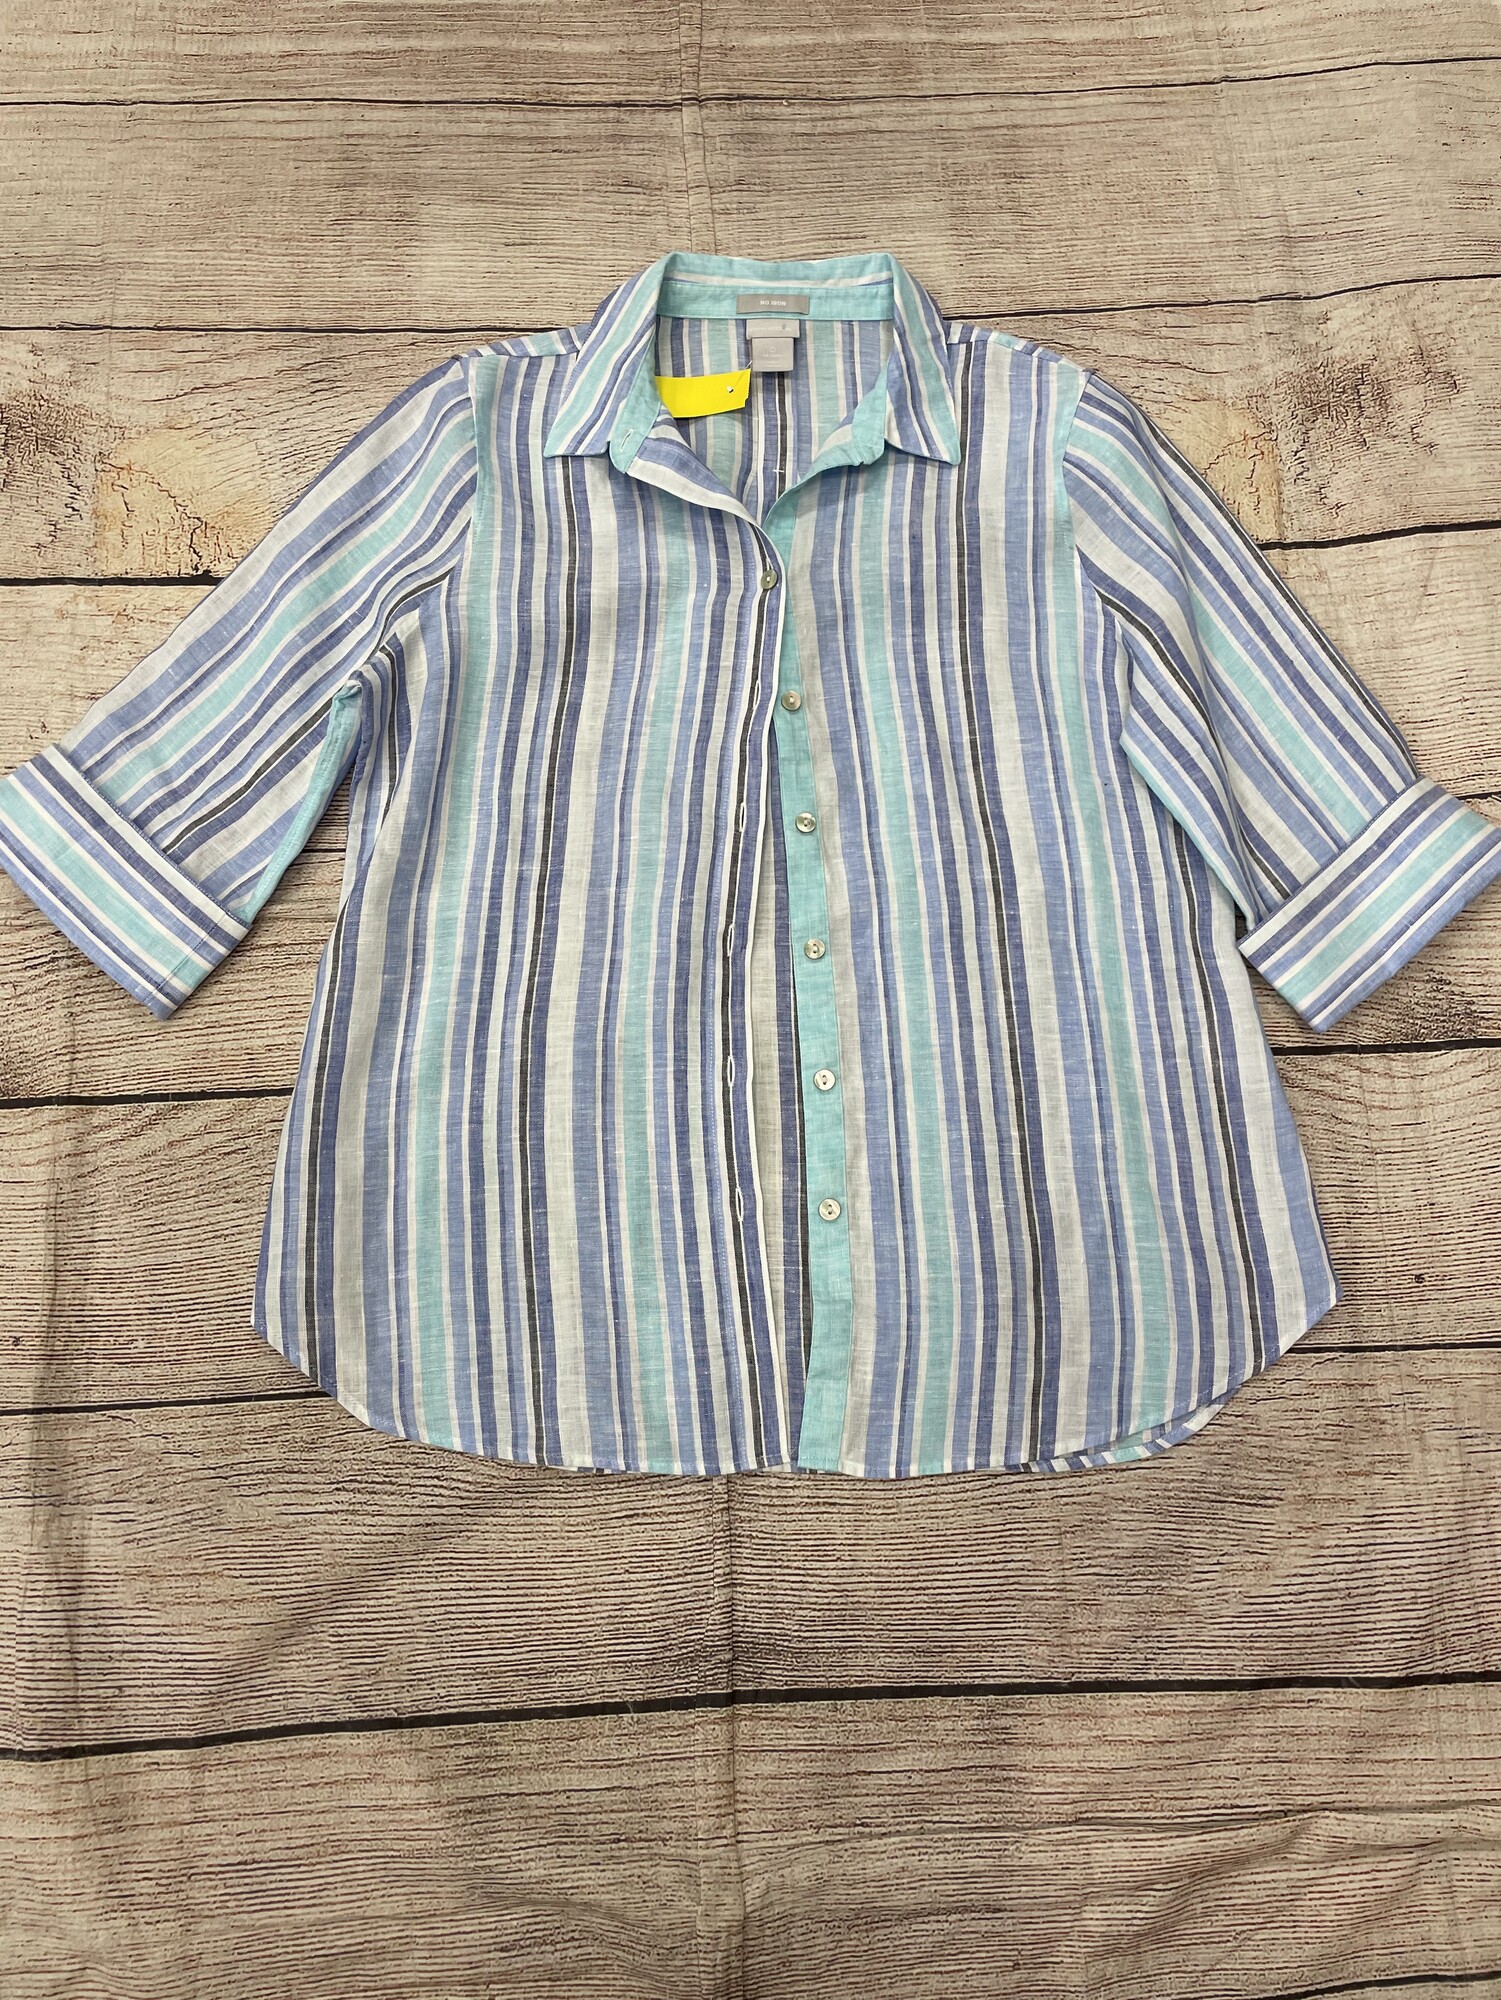 Chicos Blouse, 3/4 Sleeves, Blue Stripes, No Iron Linen, Button Down,Cuffed Sleeves, Size: Small